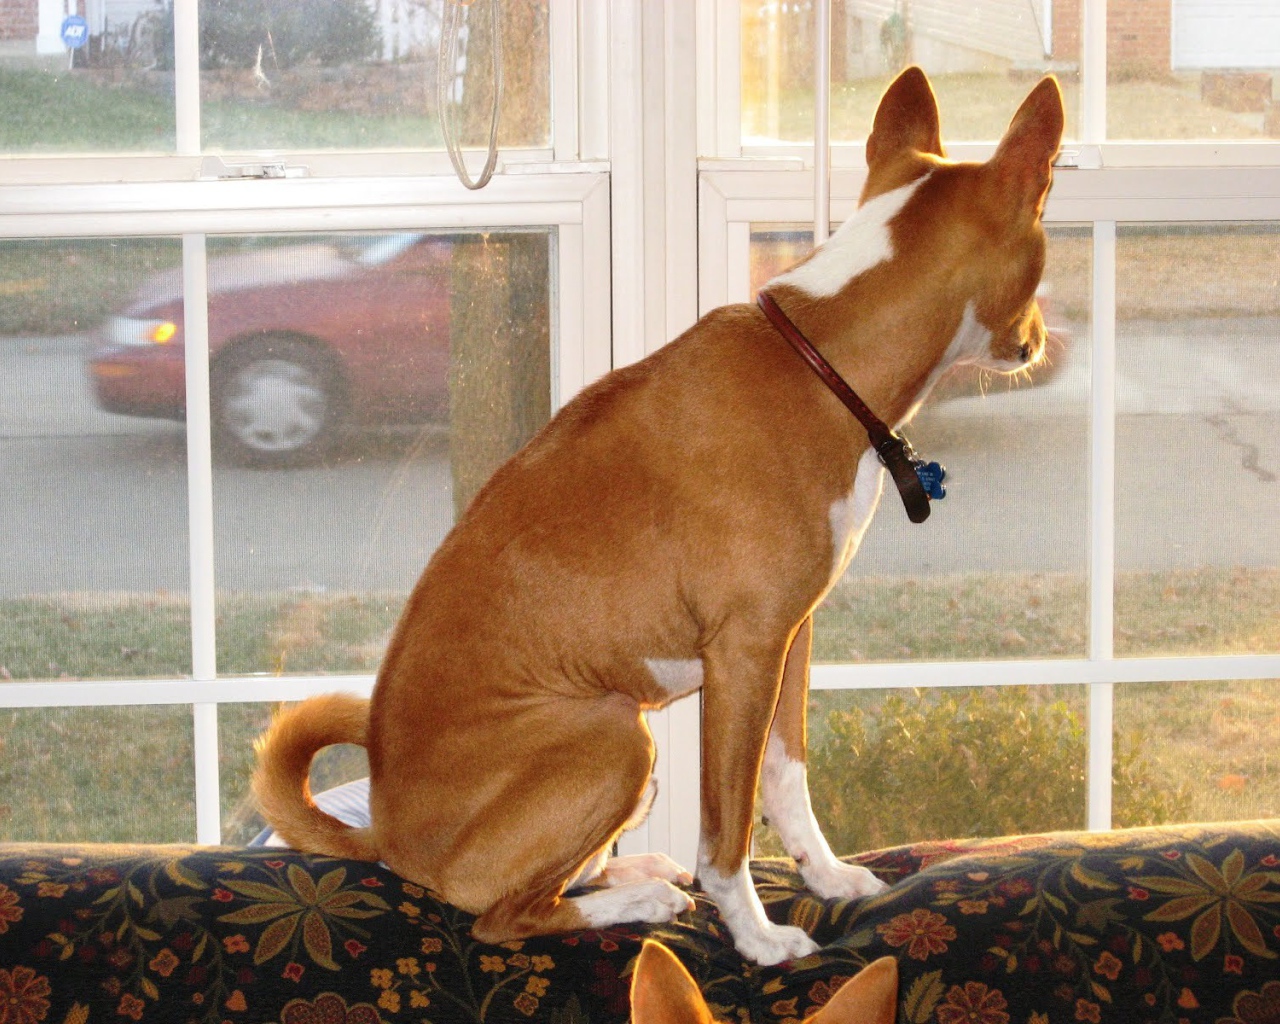 Basenji breed dog is waiting for owner